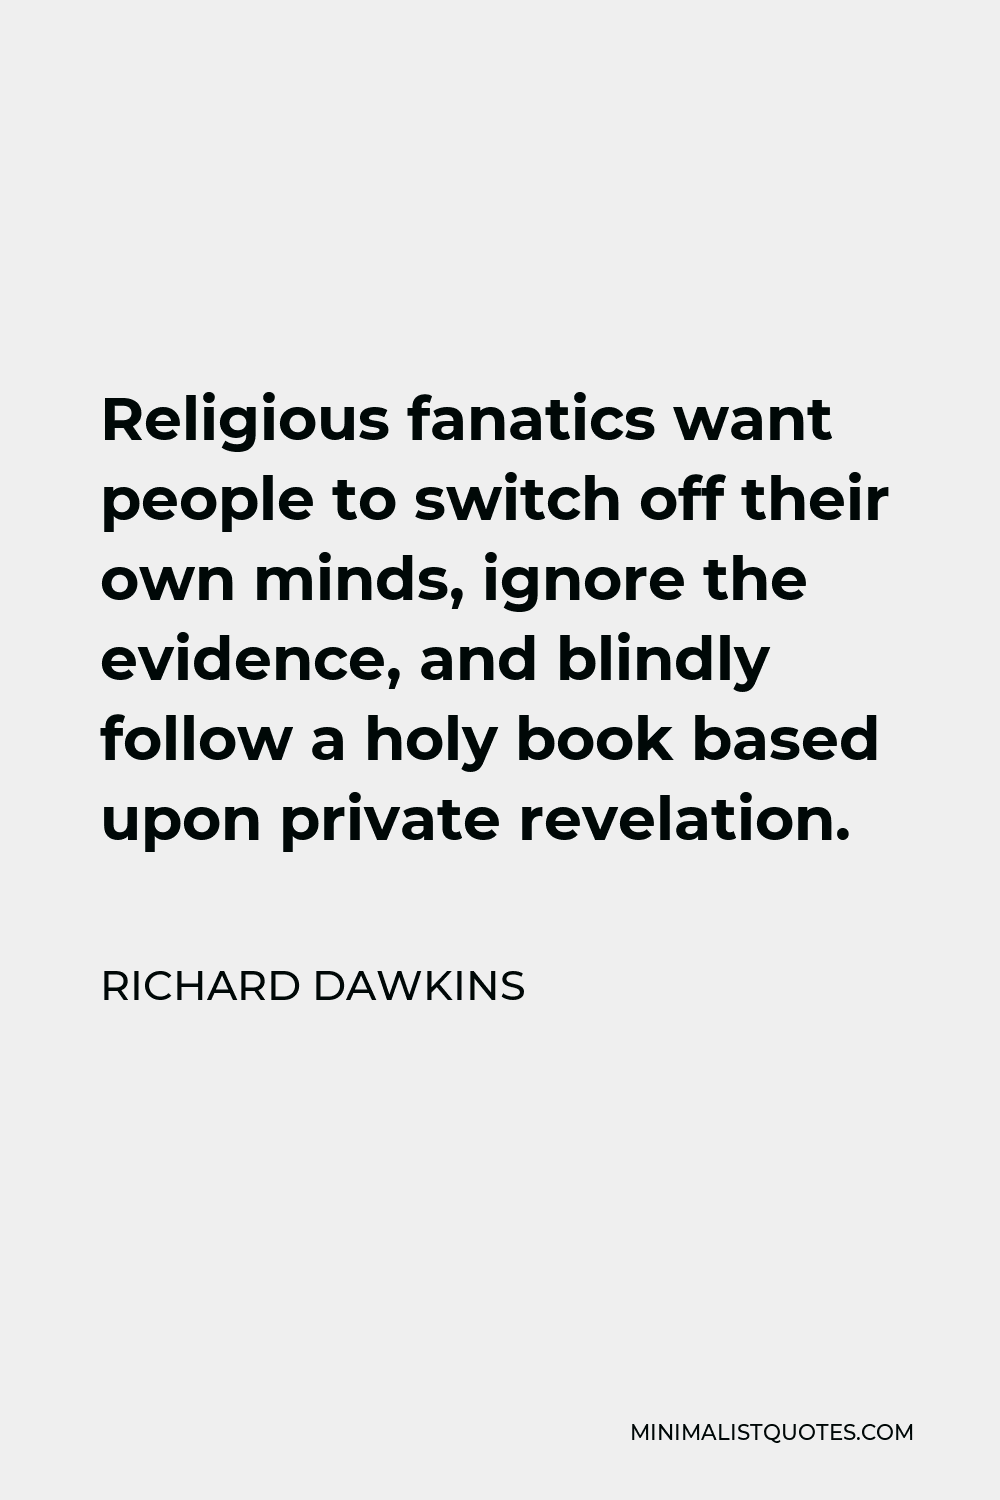 Richard Dawkins Quote: Religious fanatics want people to switch off their  own minds, ignore the evidence, and blindly follow a holy book based upon  private revelation.